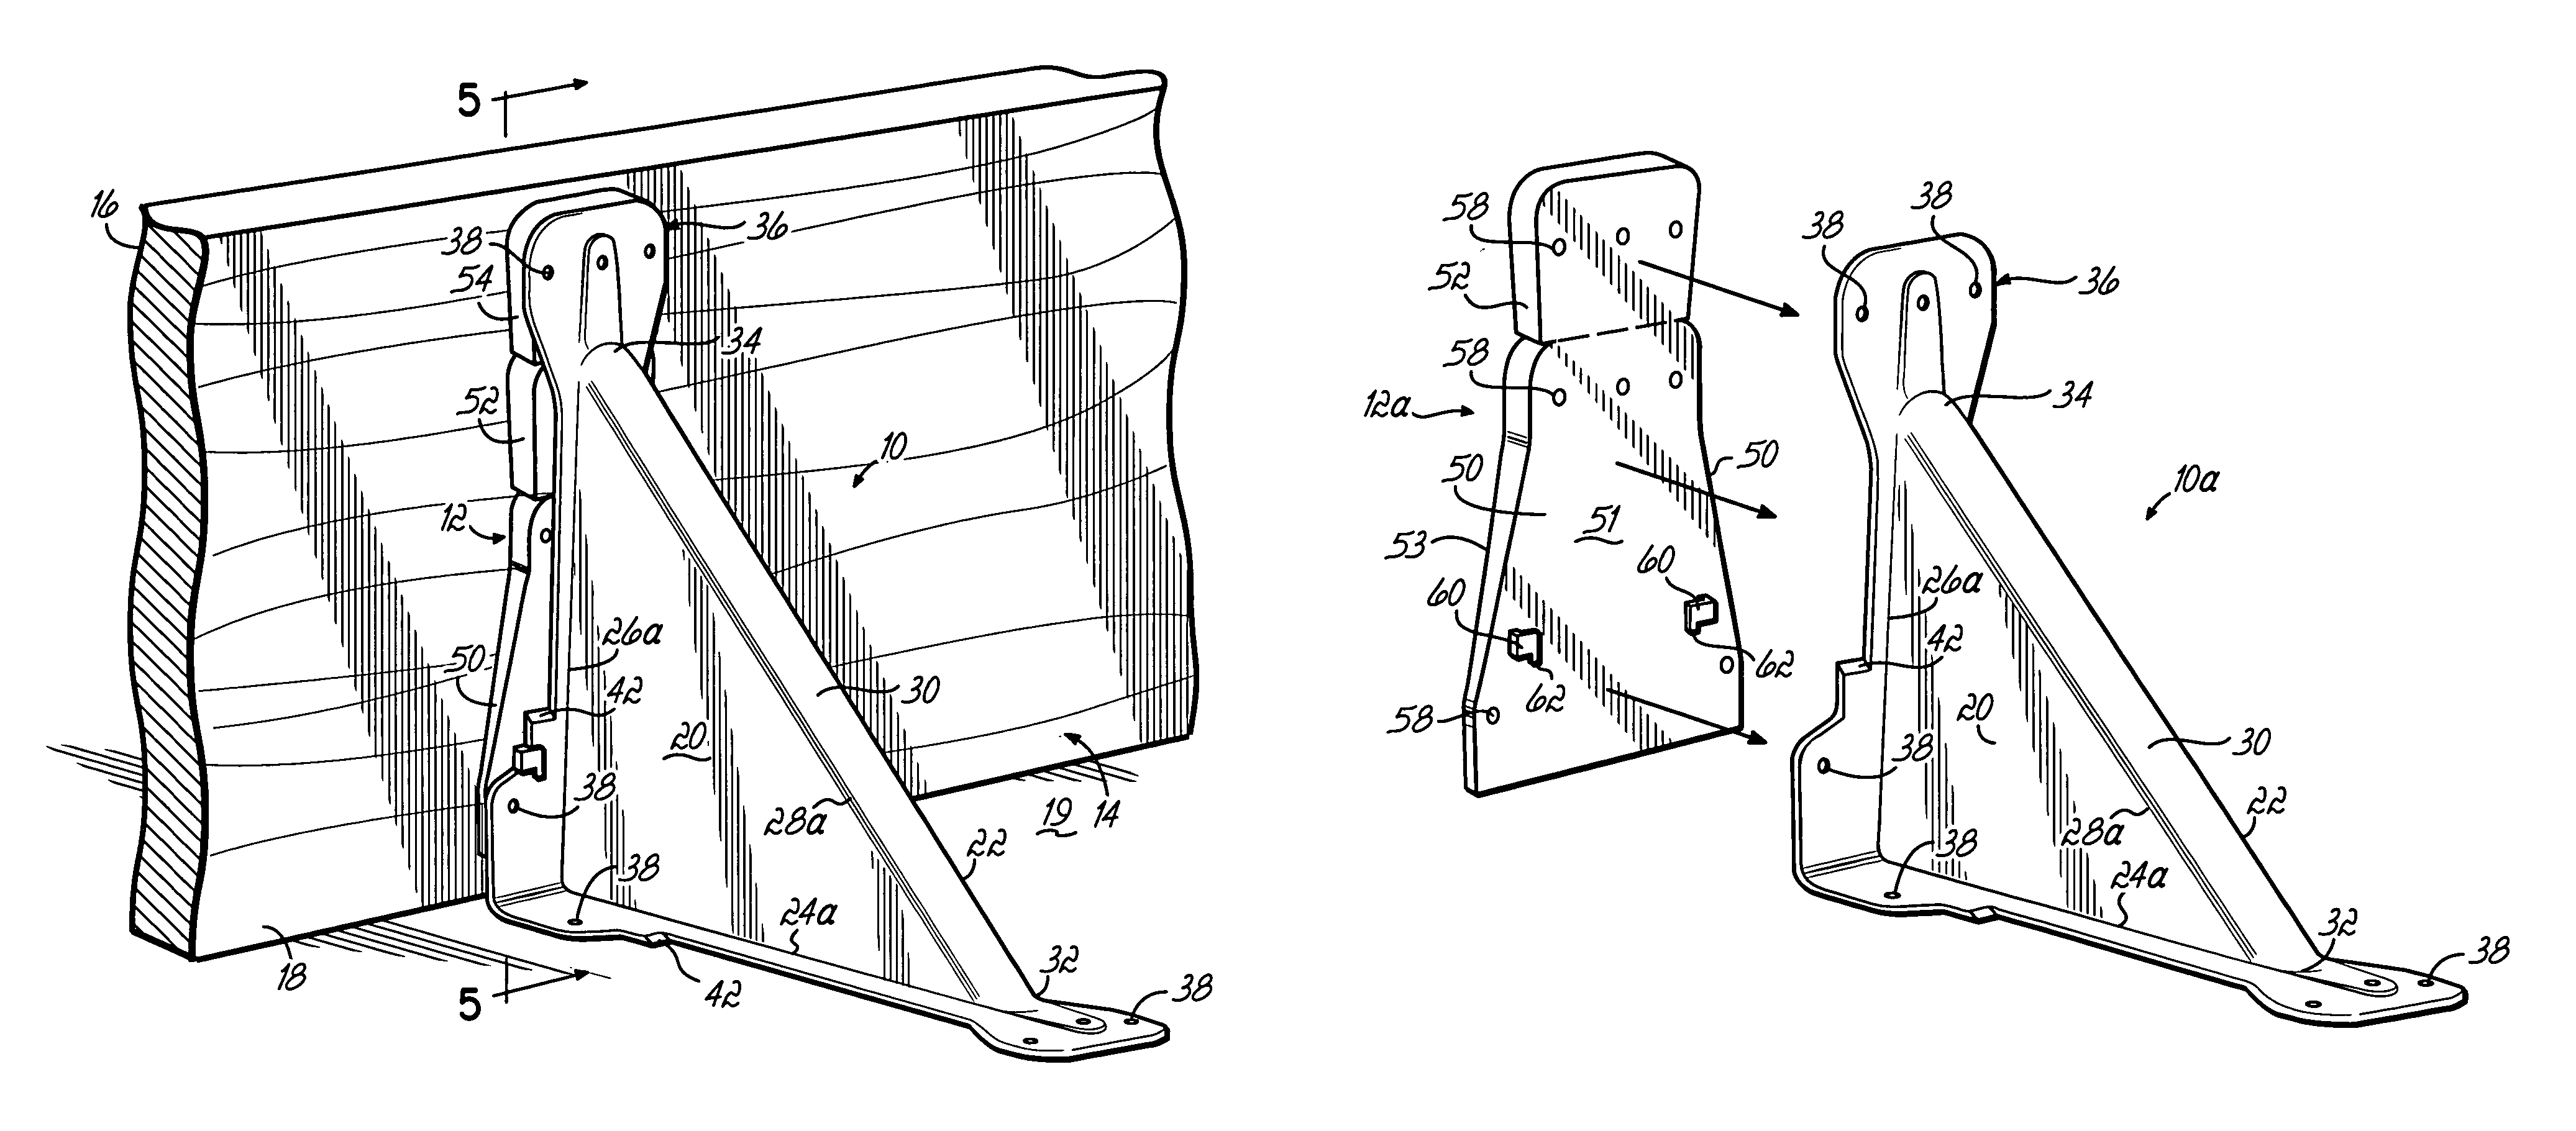 Concrete form brace and battering wedge